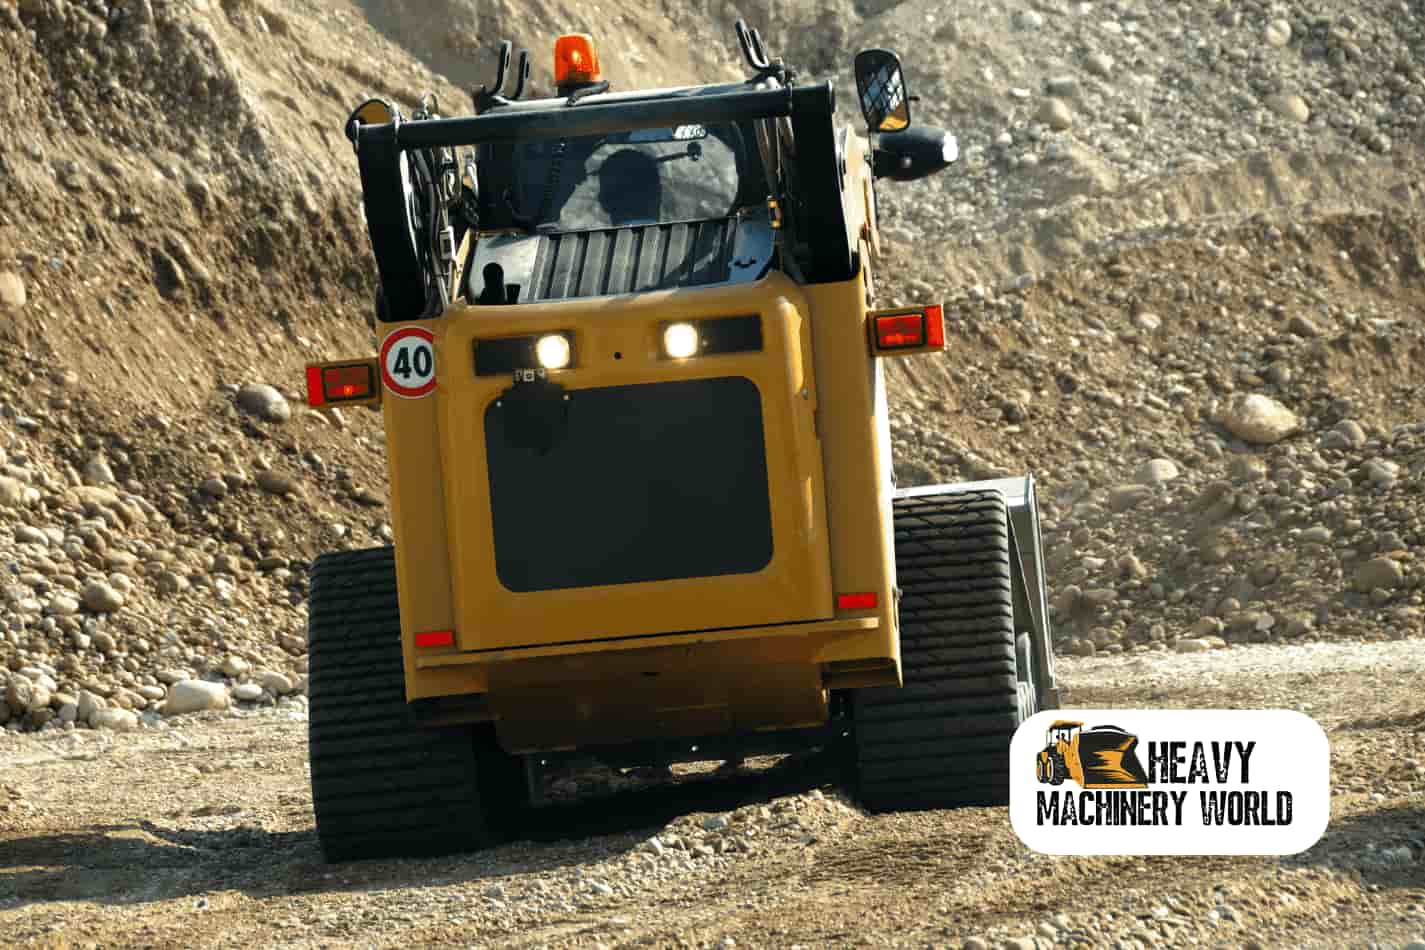 How To Become a Heavy Equipment Operator: Step-by-Step Guide